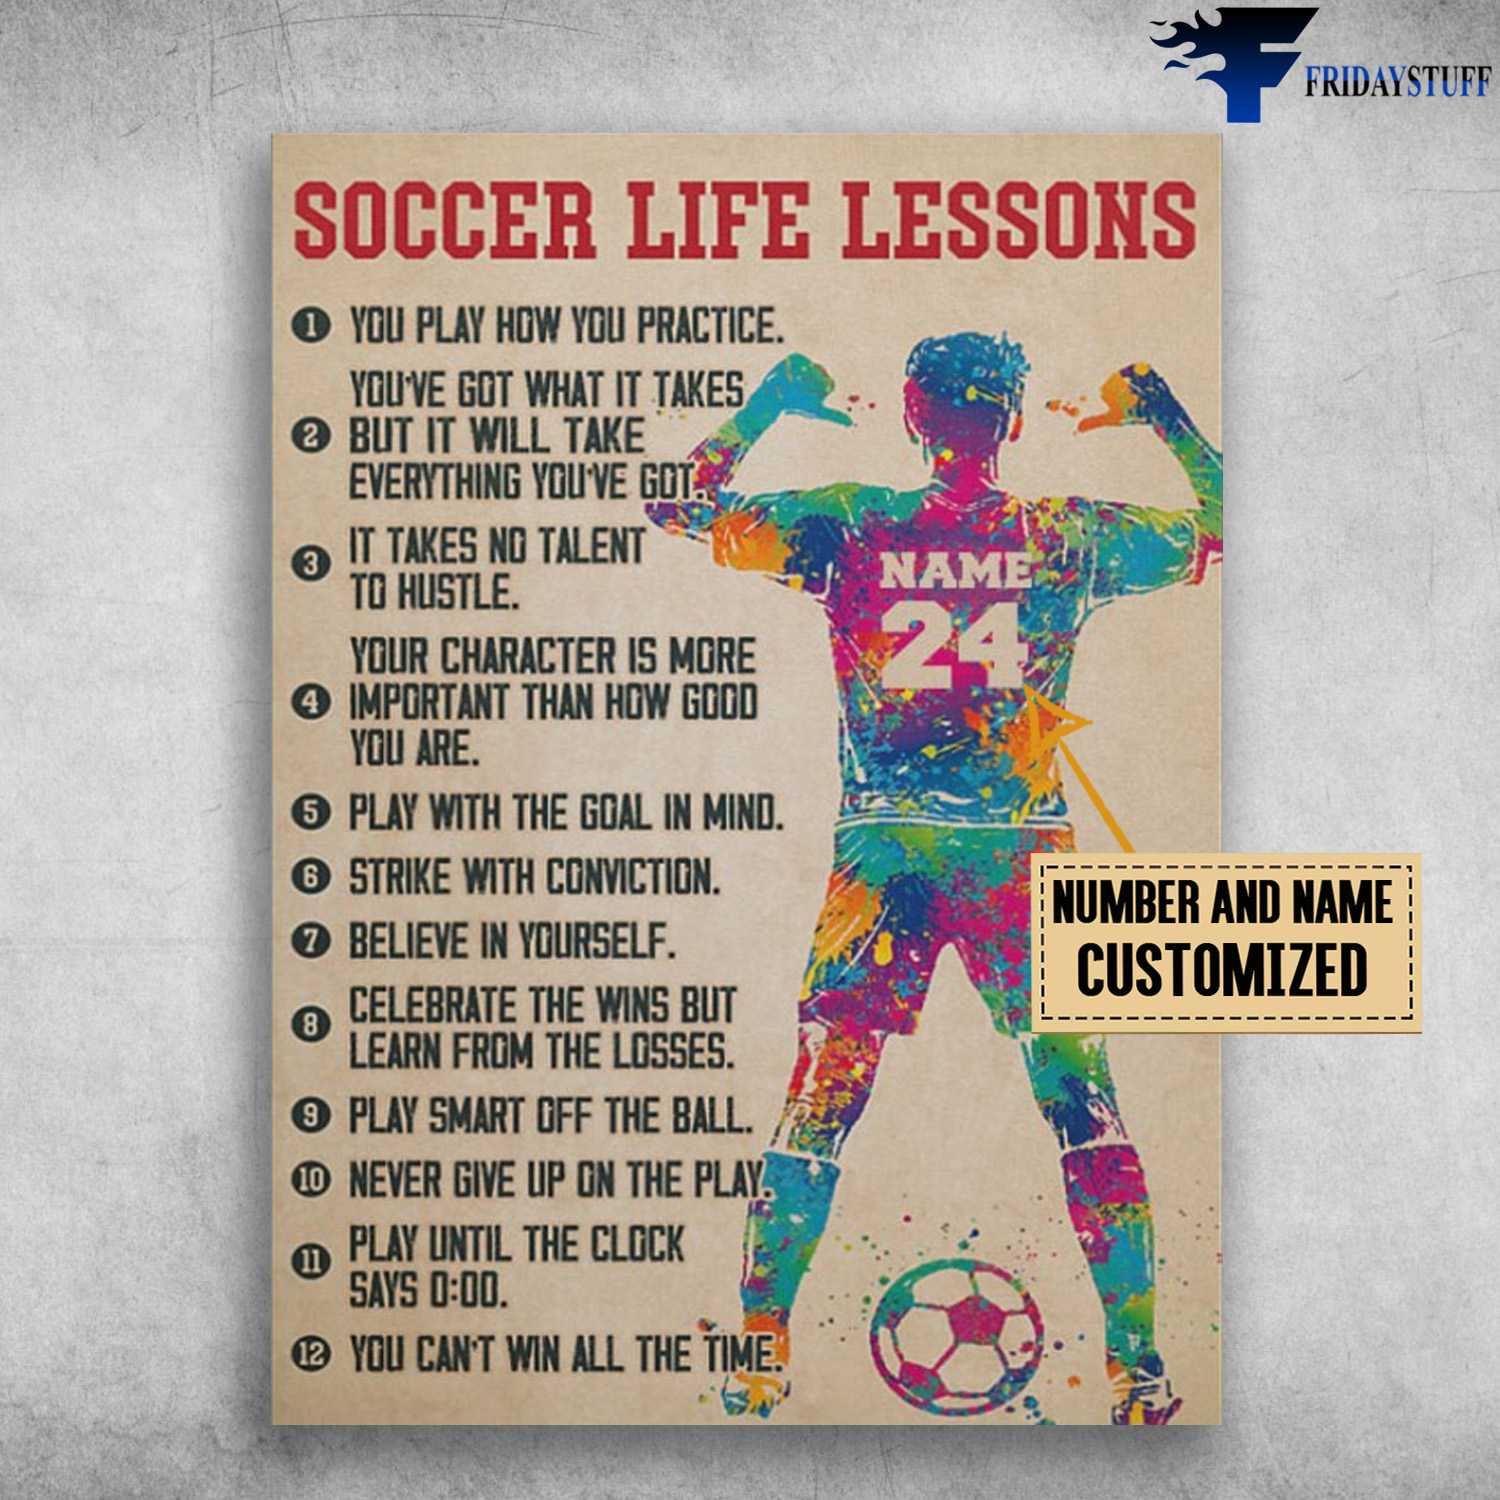 Soccer Lover, Soccer Player, Soccer Life Lessons, You Play How You Practice, You've Got It Will Take Everything You've Got, It Takes No Talent To Hustle, Your Character Is More, Important Than How Good You Are